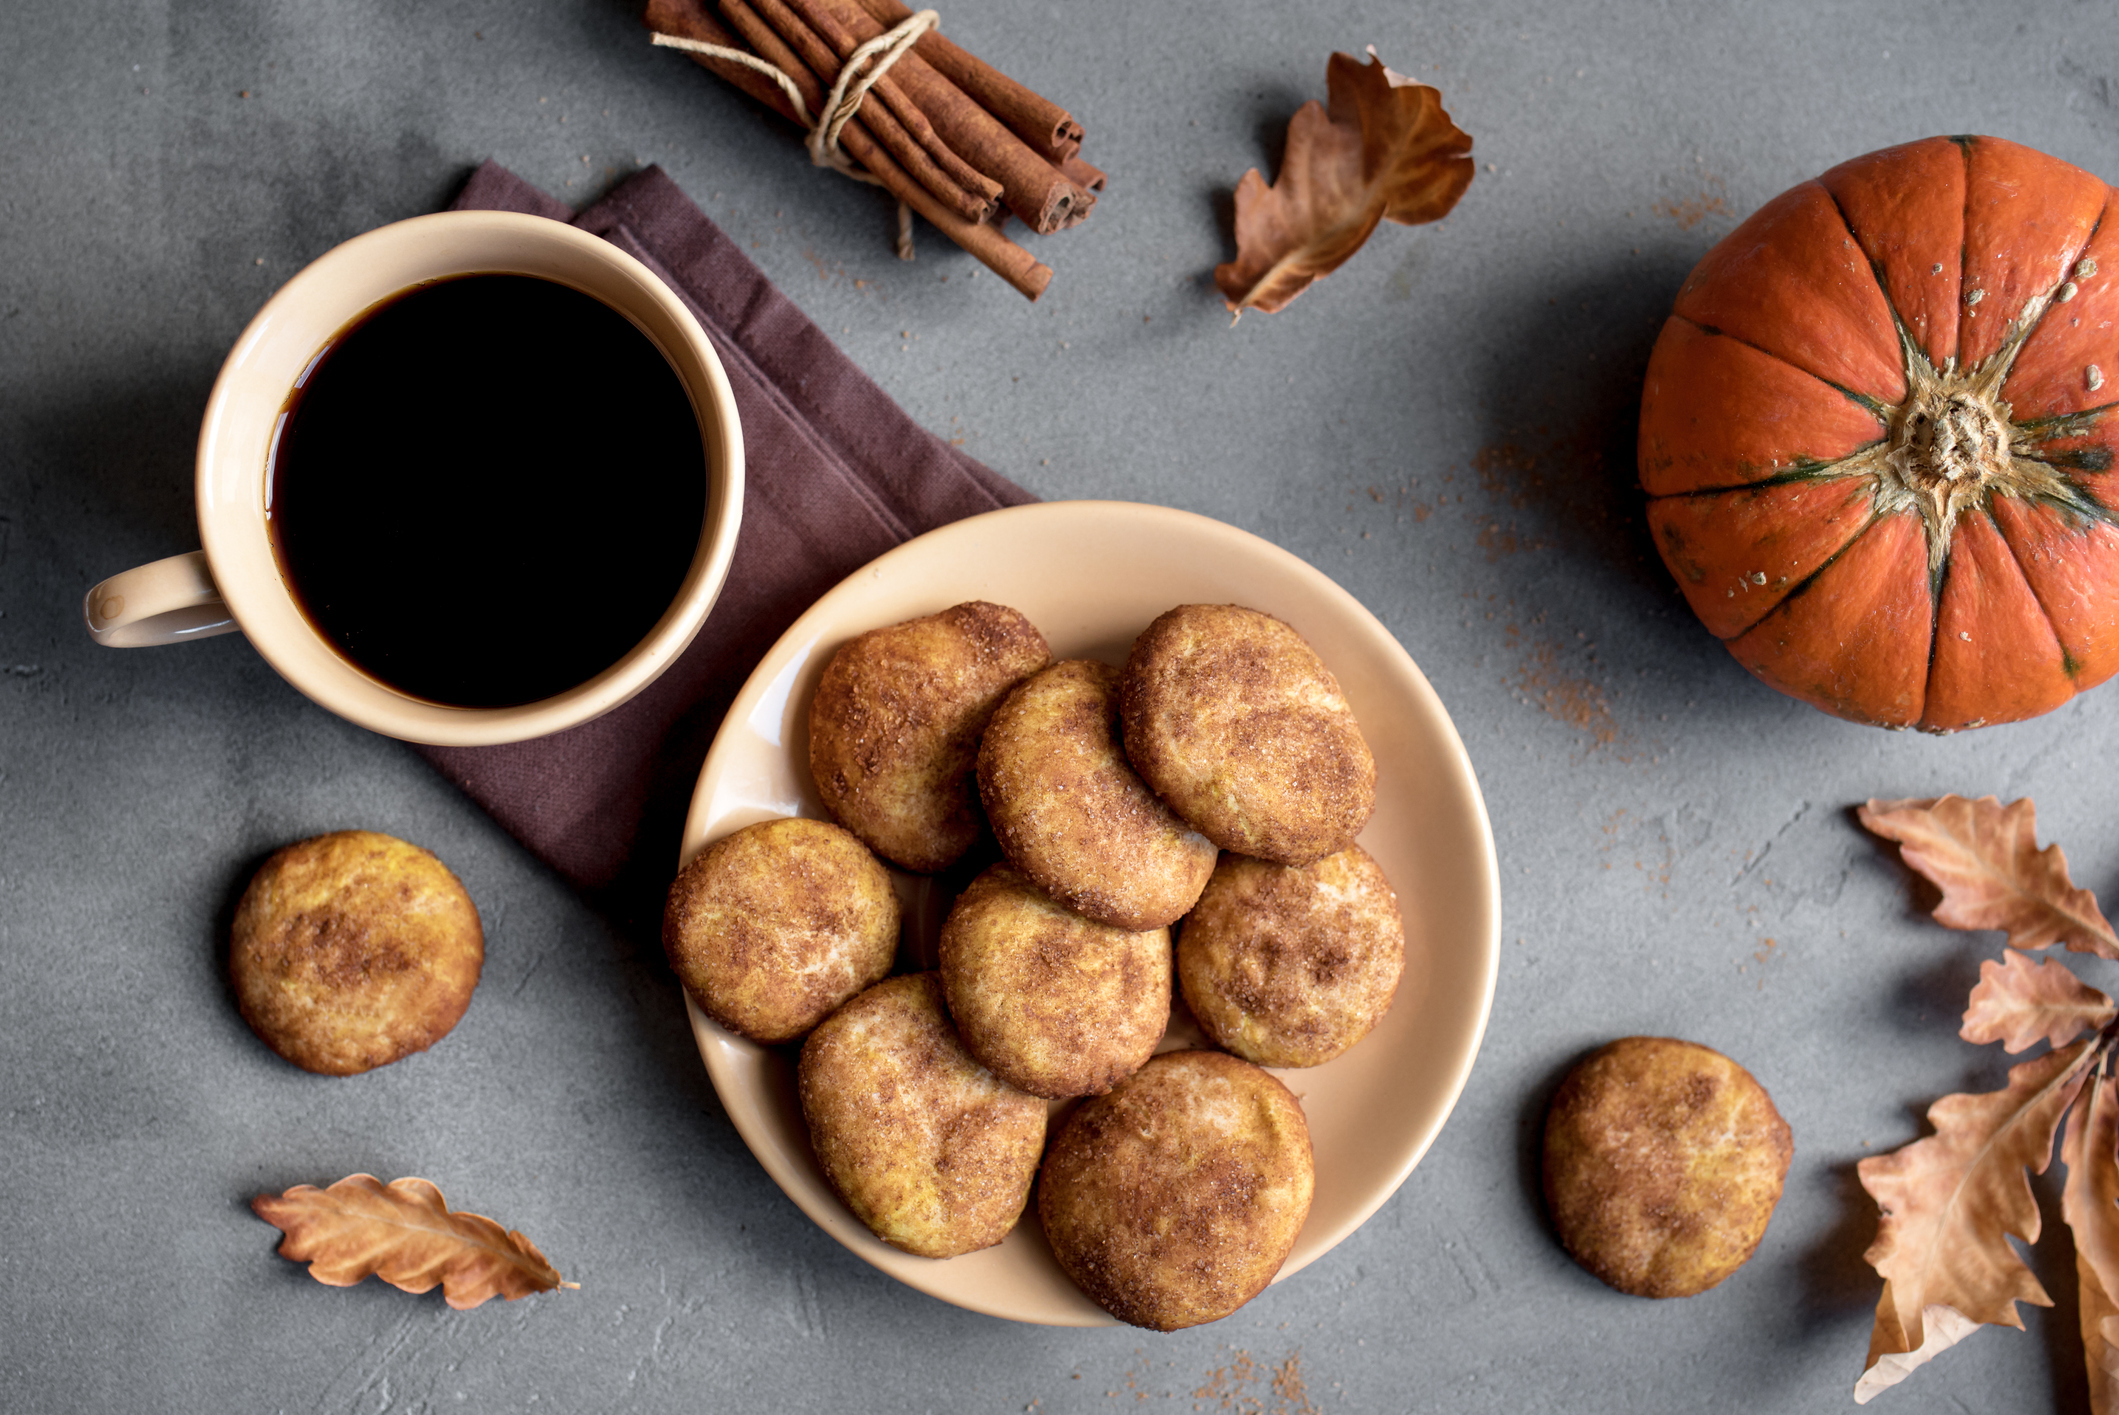 Learn how to make Pumpkin Snickerdoodles just in time for Thaknsgiving